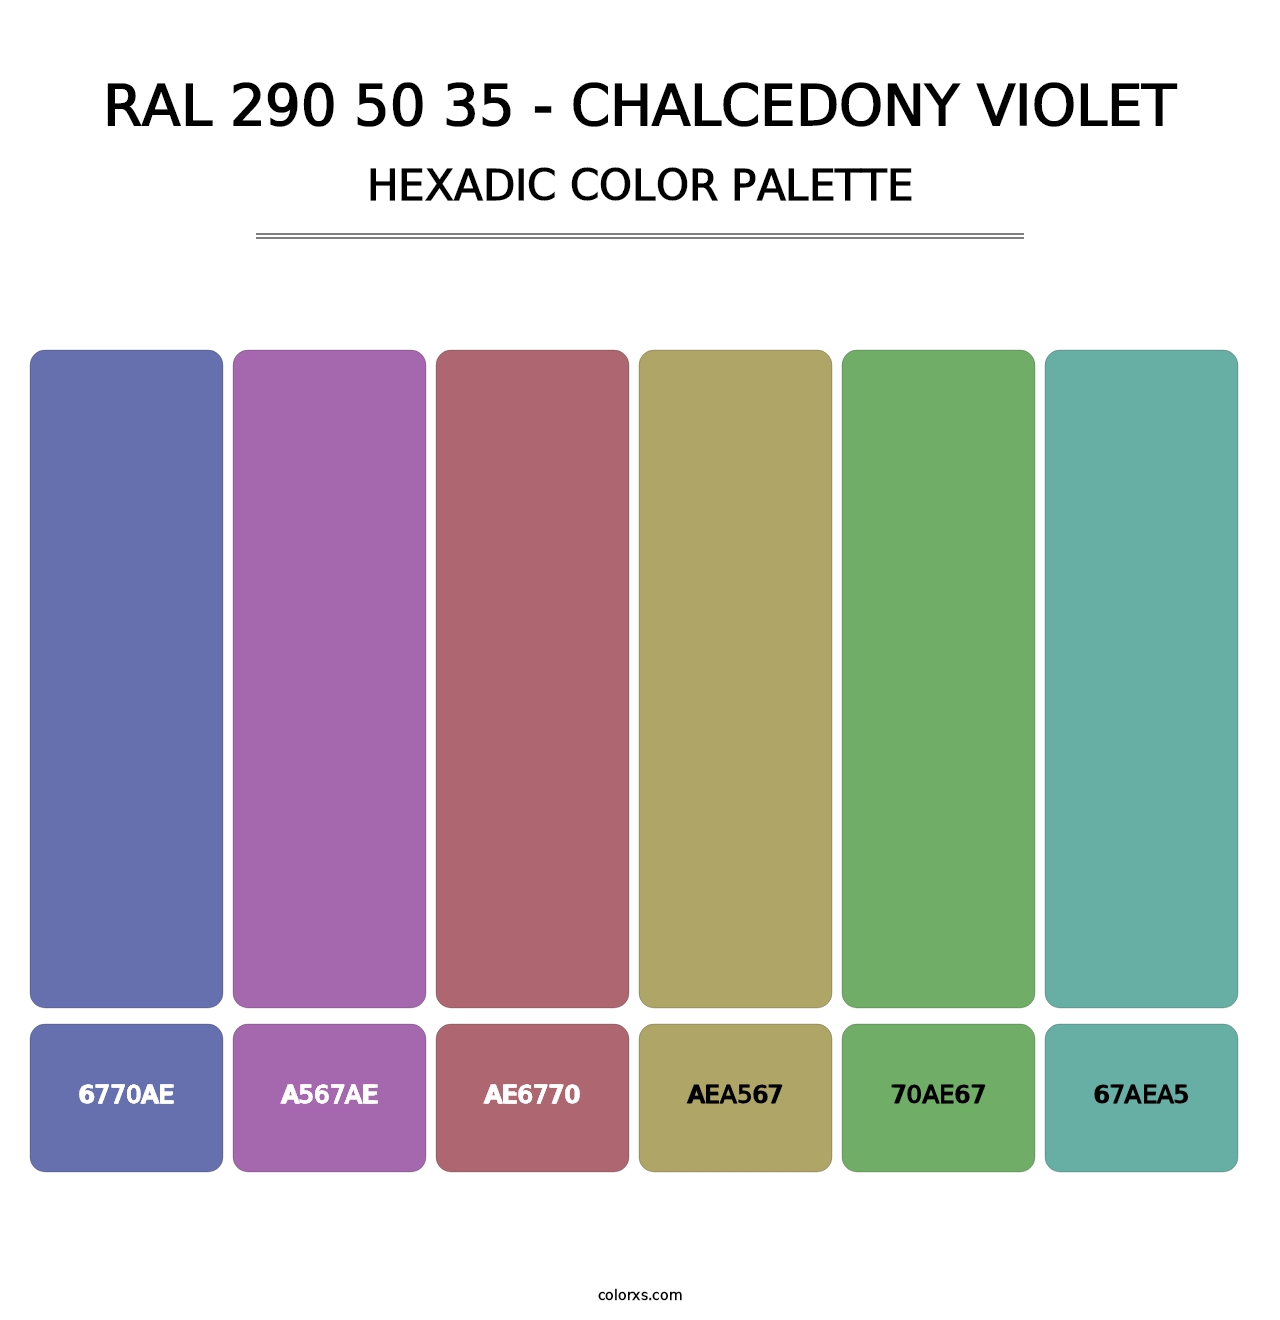 RAL 290 50 35 - Chalcedony Violet - Hexadic Color Palette